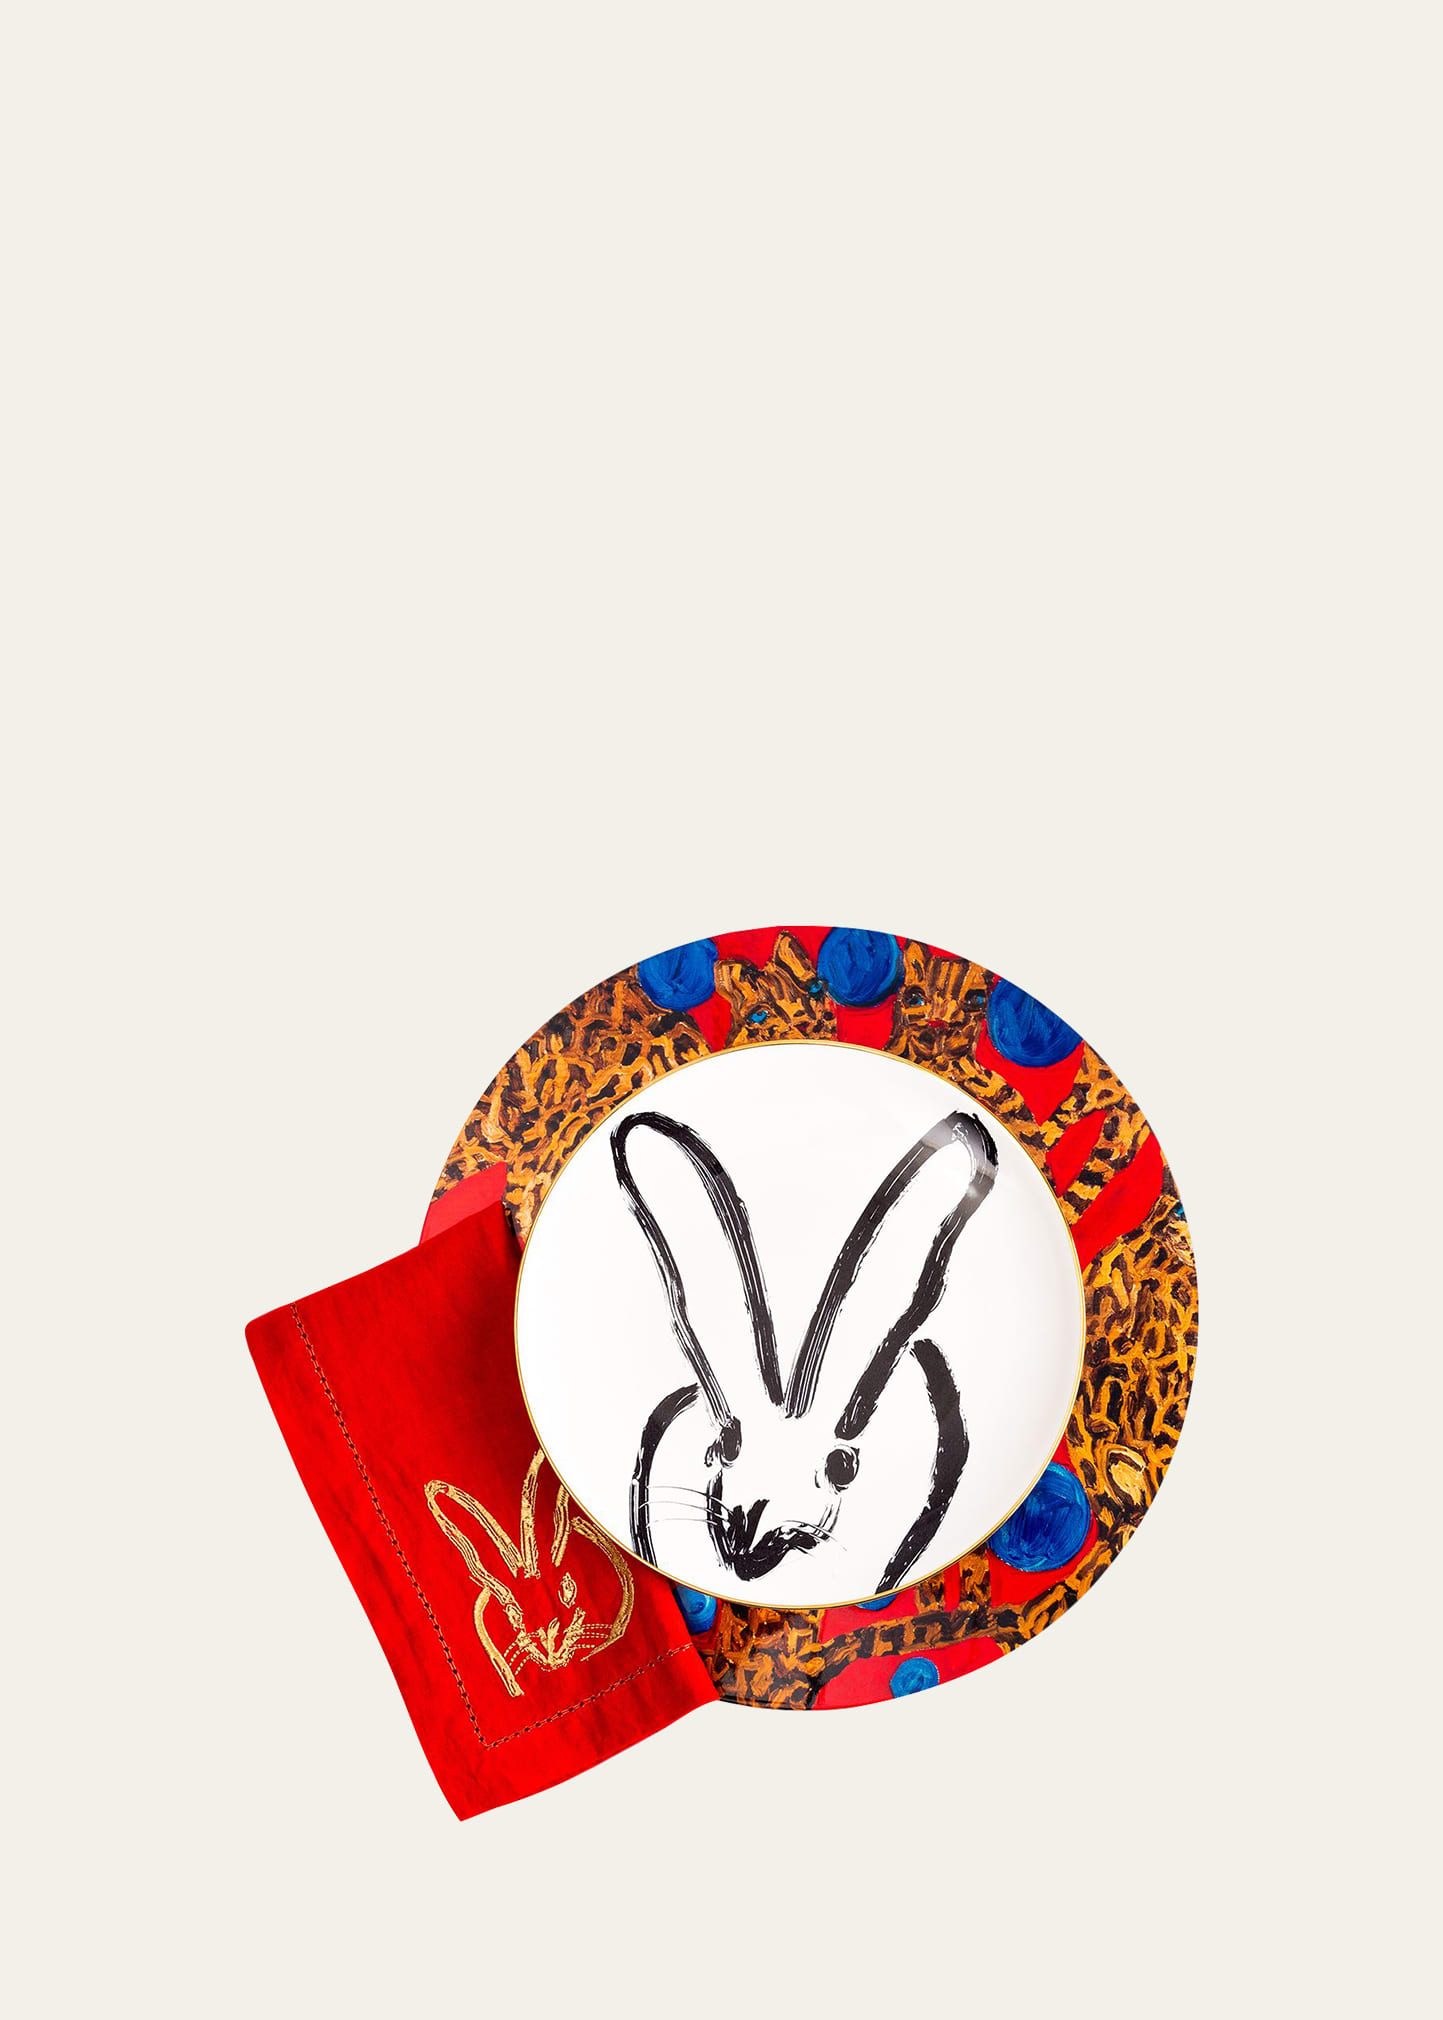 Painted Bunny Embroidered Linen Dinner Napkin, Red with Gold, Set